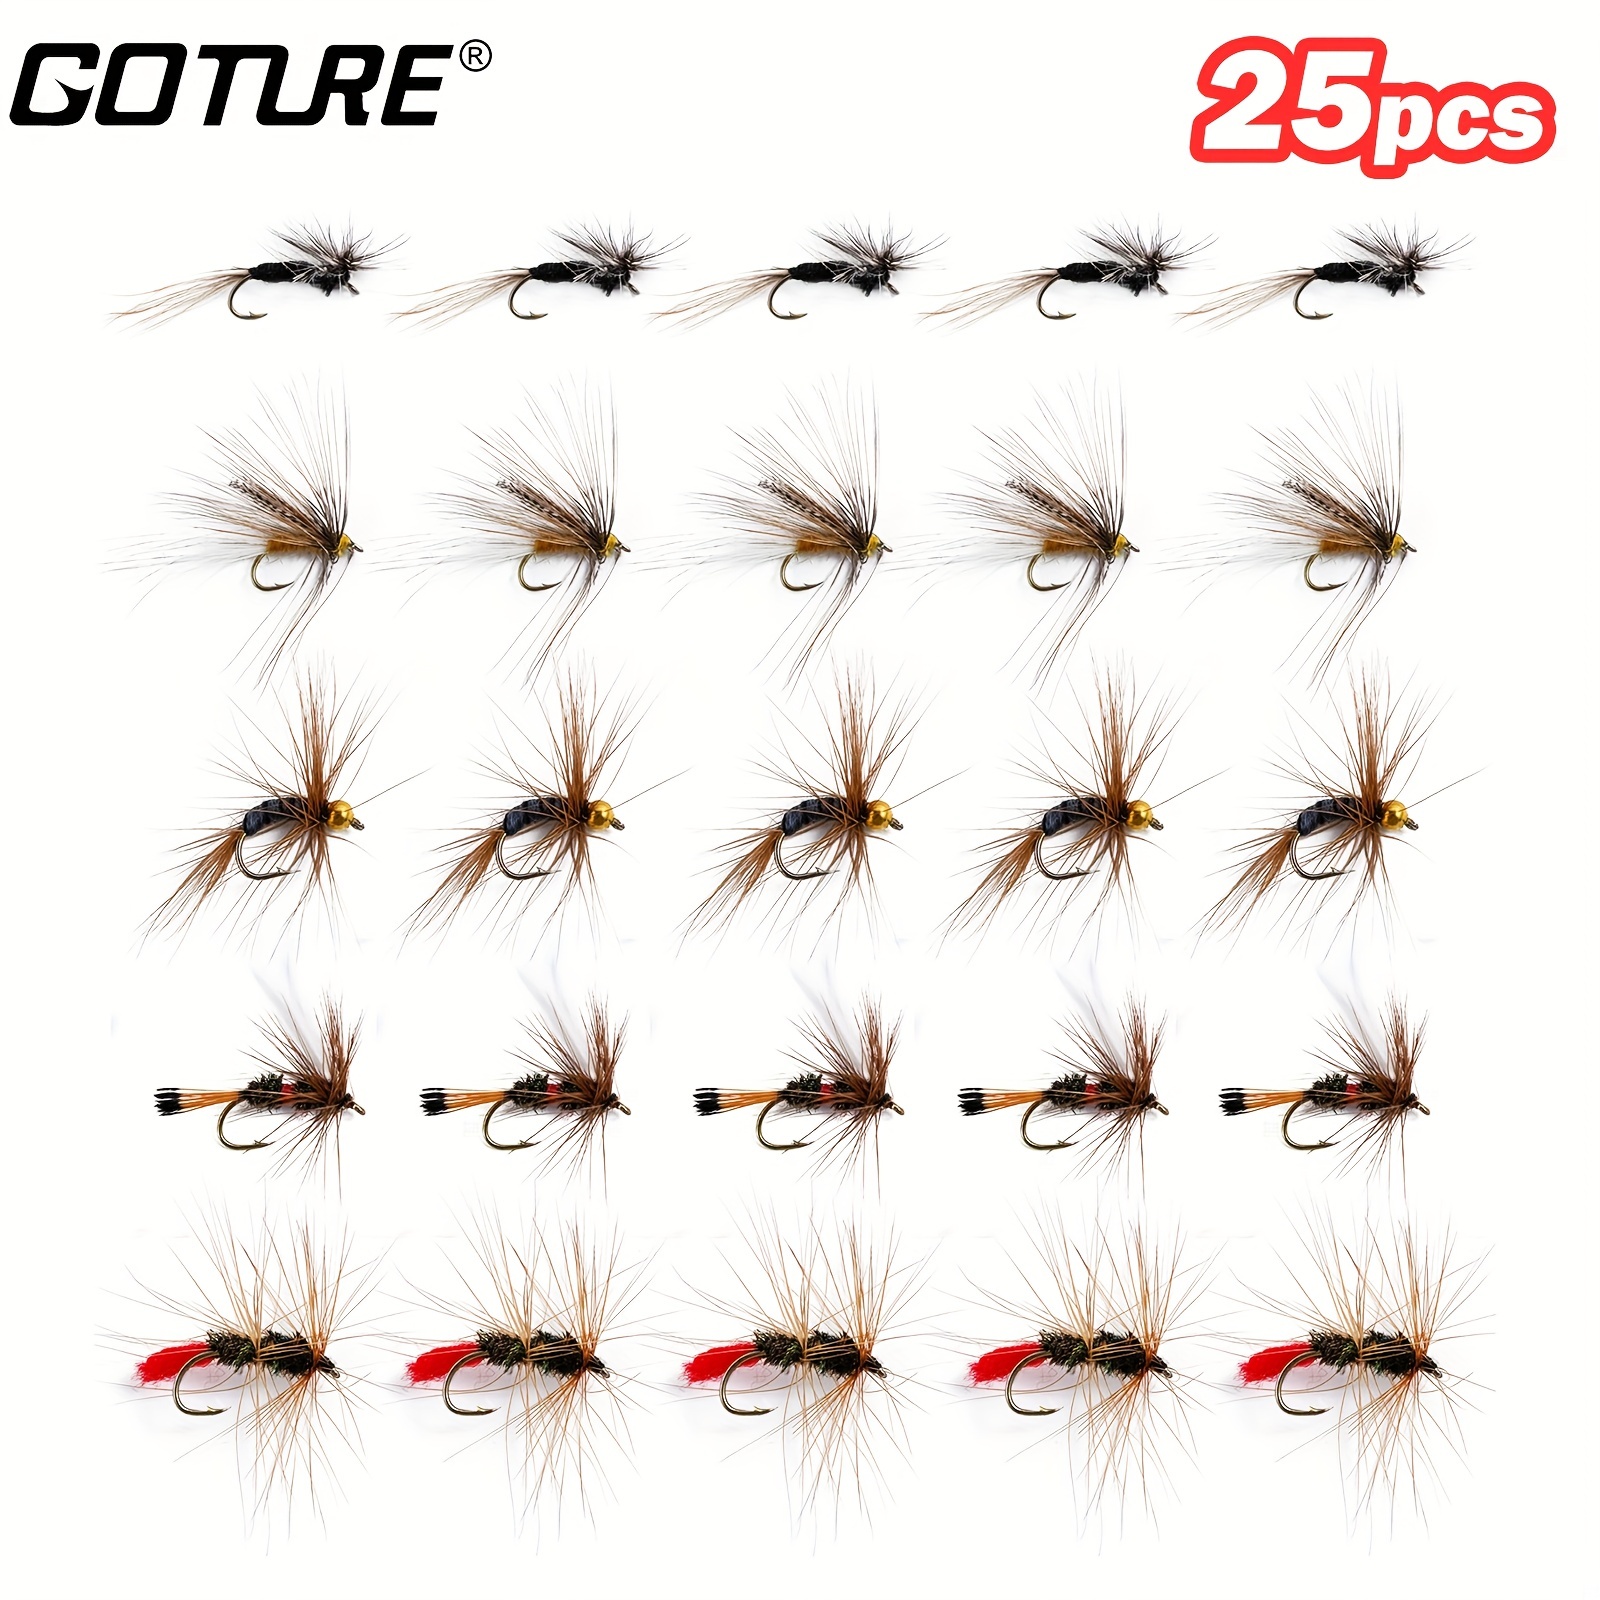 25pcs Fly Fishing Lure Kit Including Hooks, Dry * Wet * 5 Styles Perfect  For Streamers, Trout, And Bass Fishing